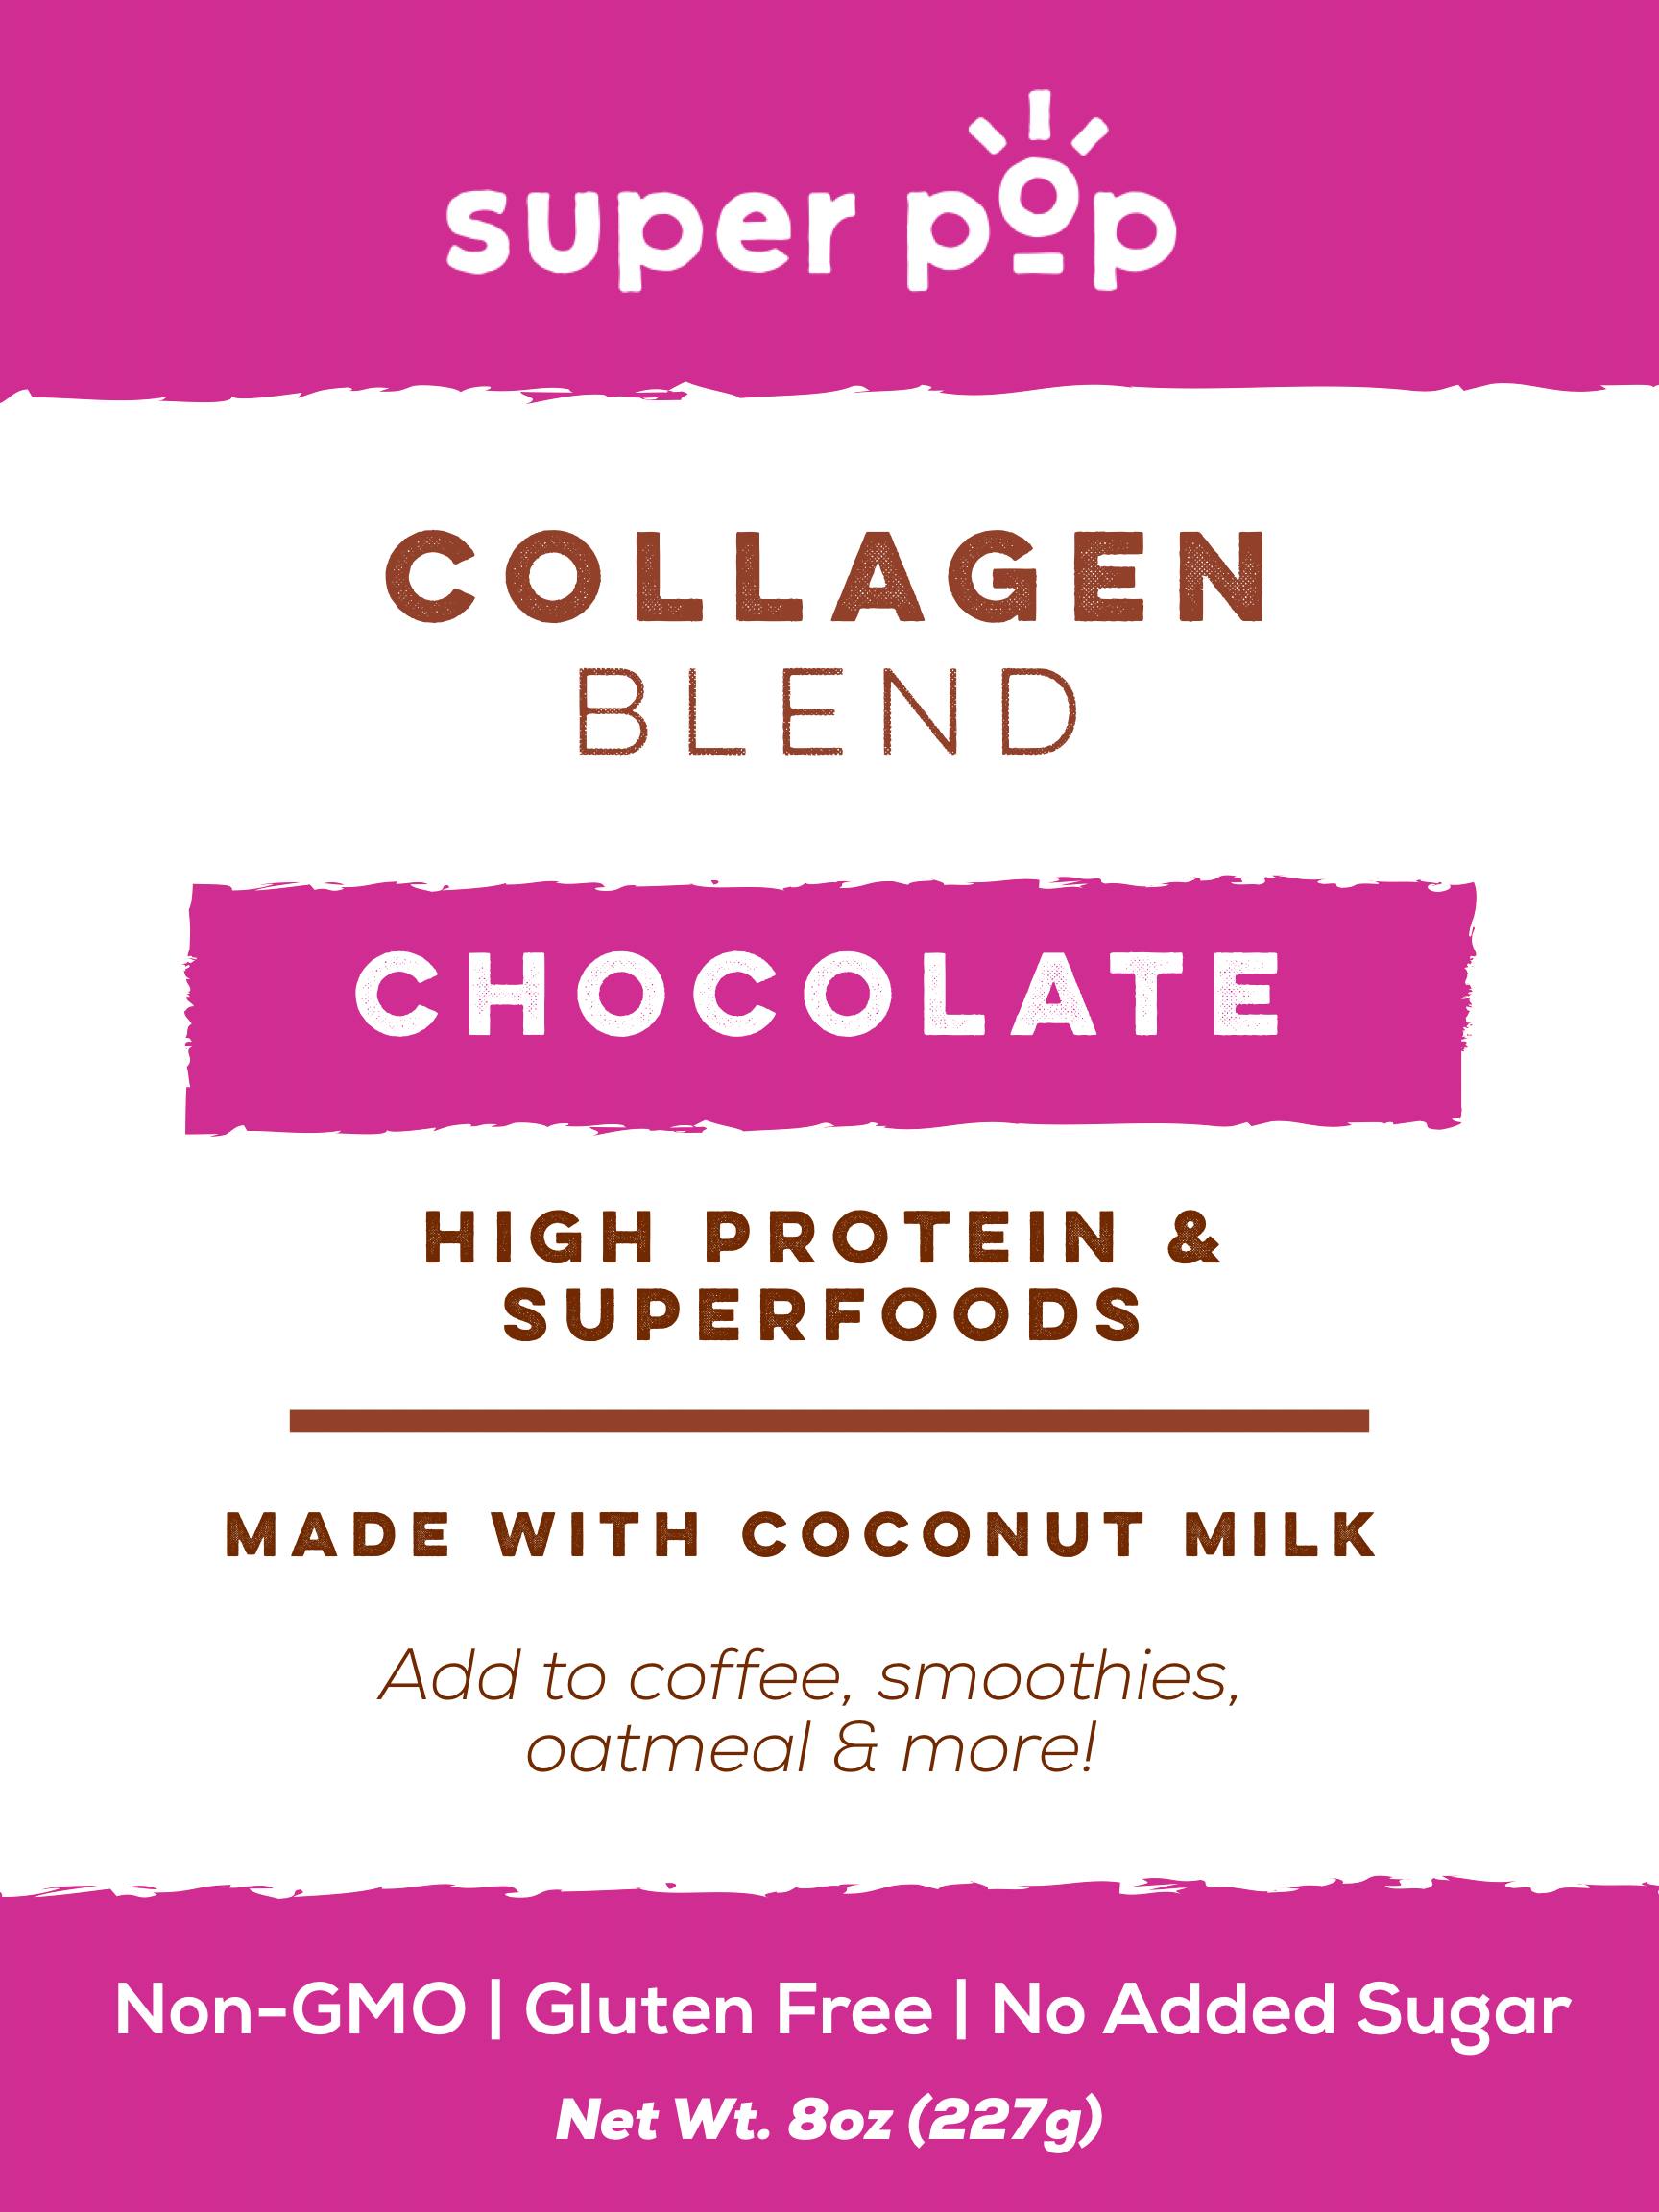 All New Chocolate Collagen Protein Blends!